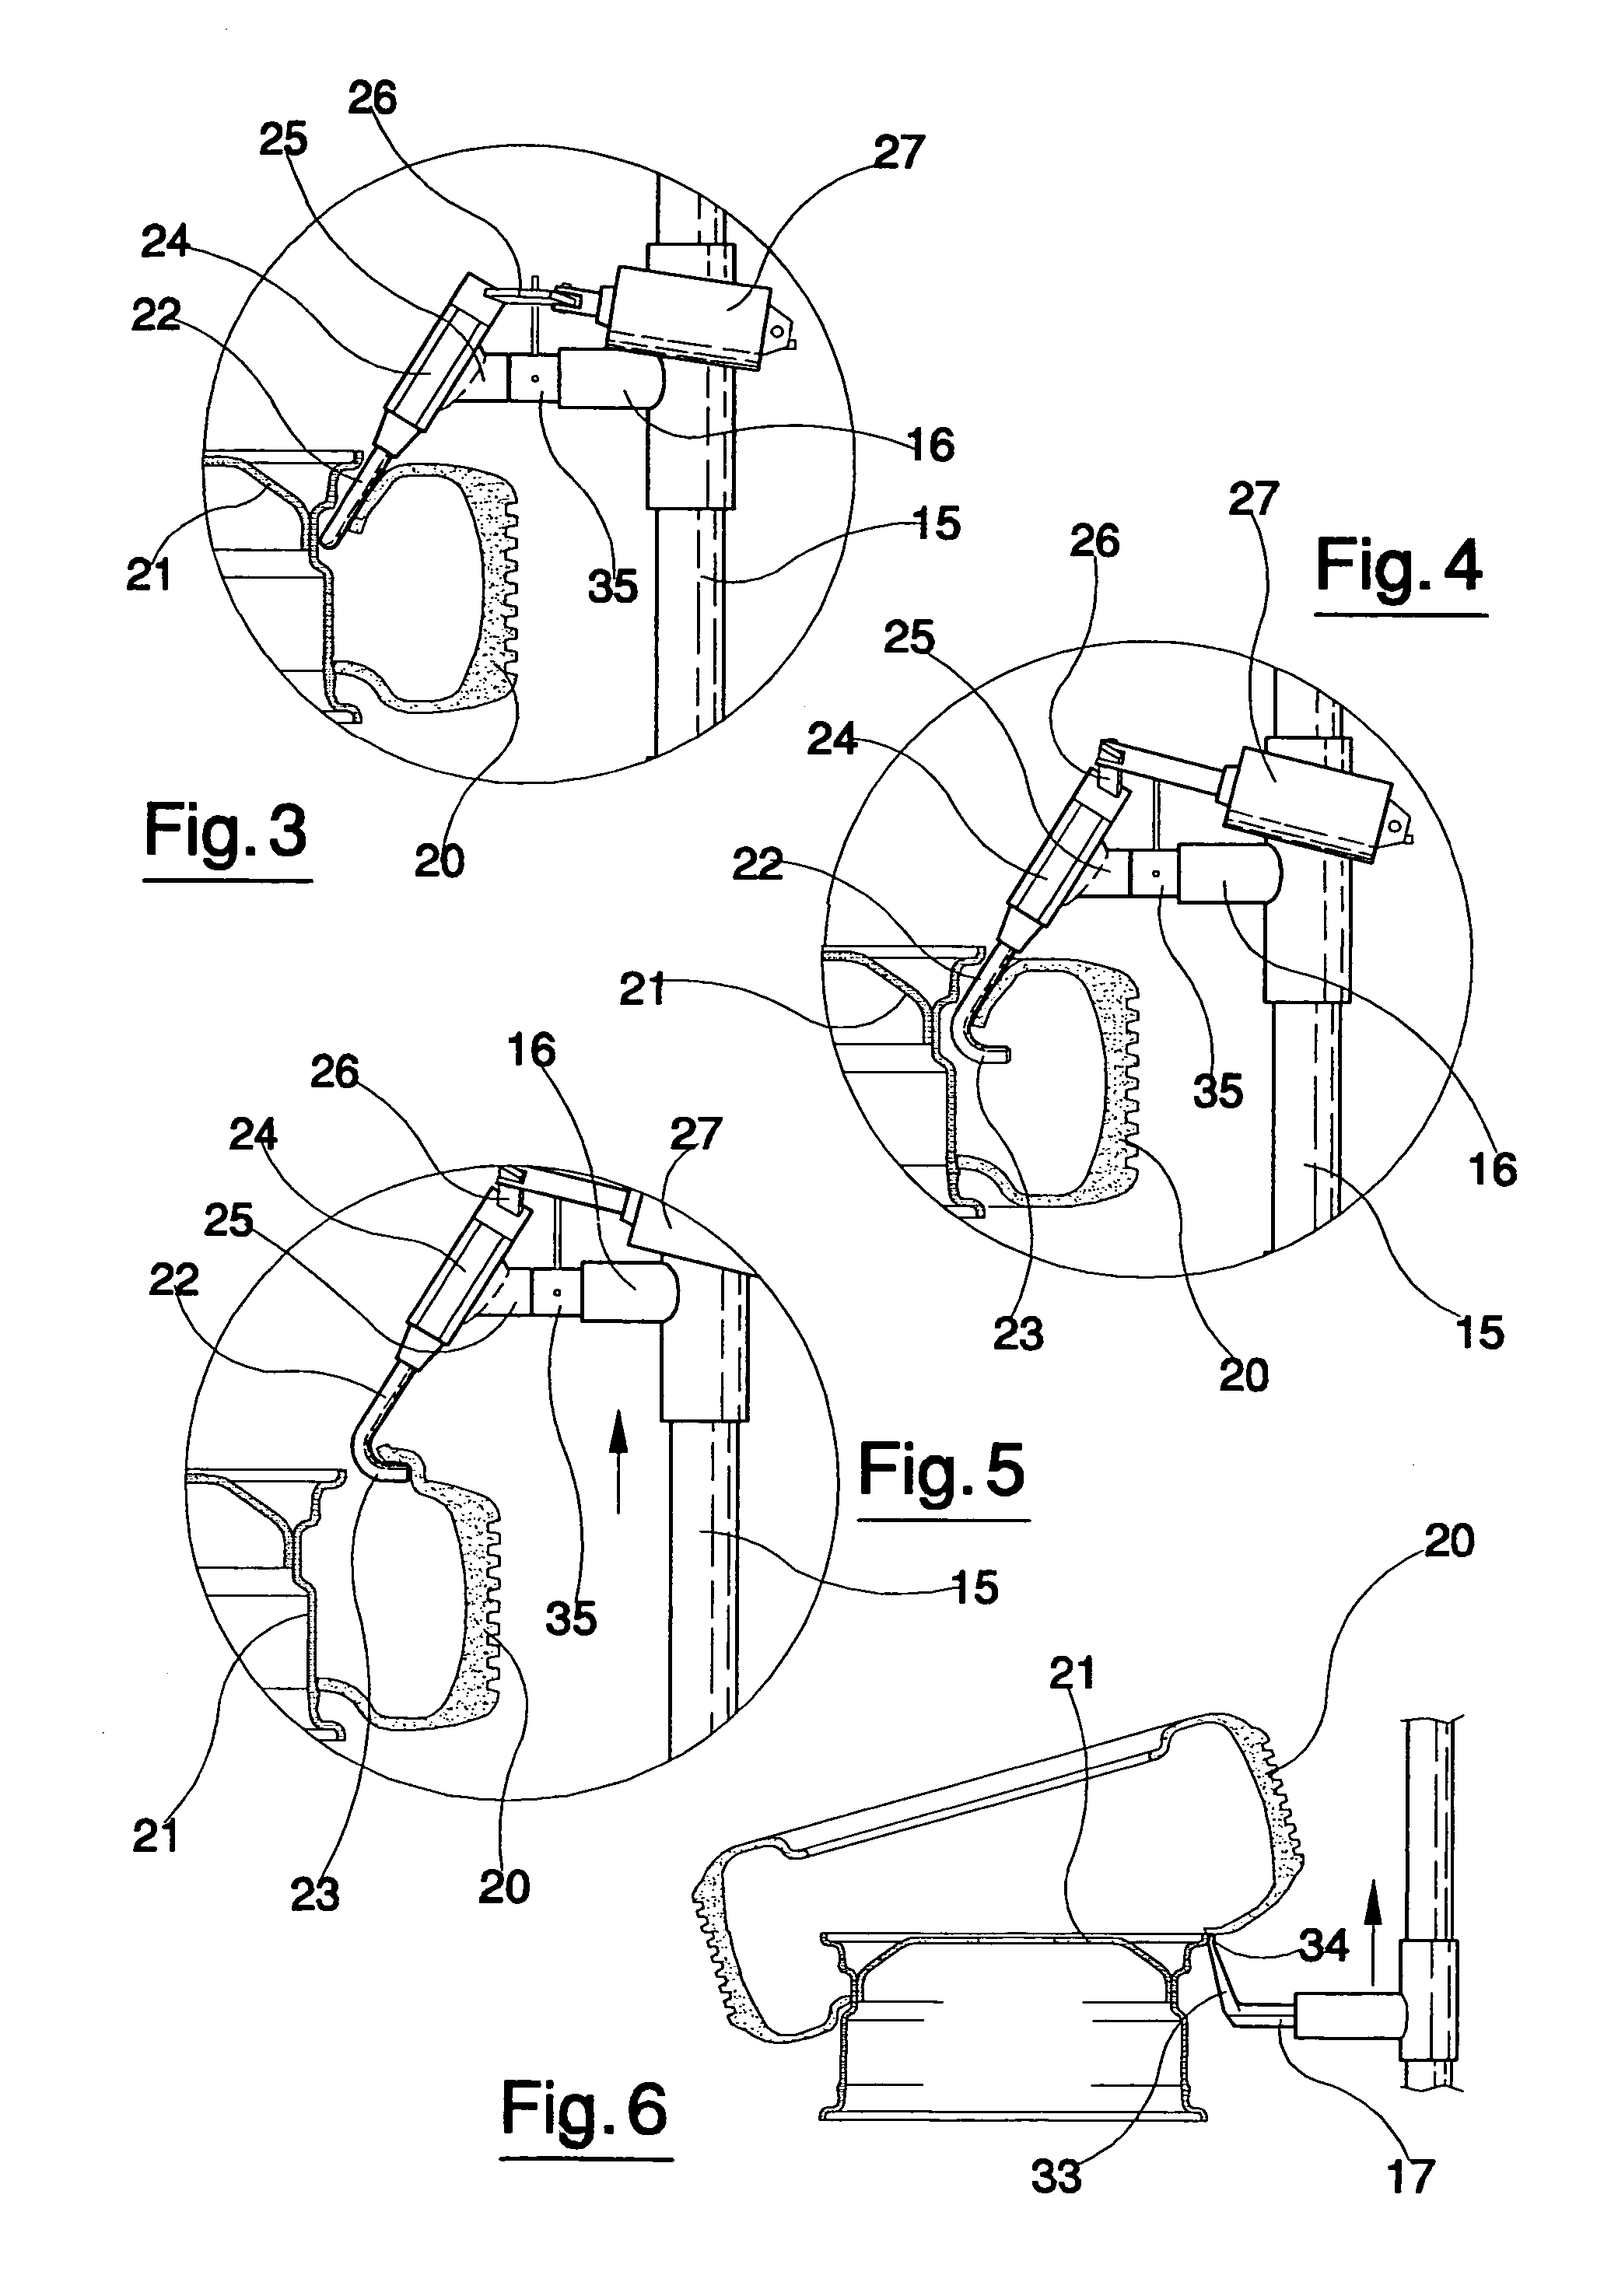 Device for mounting and dismounting tires of wheels positioned on a wheel support of a tire changing machine